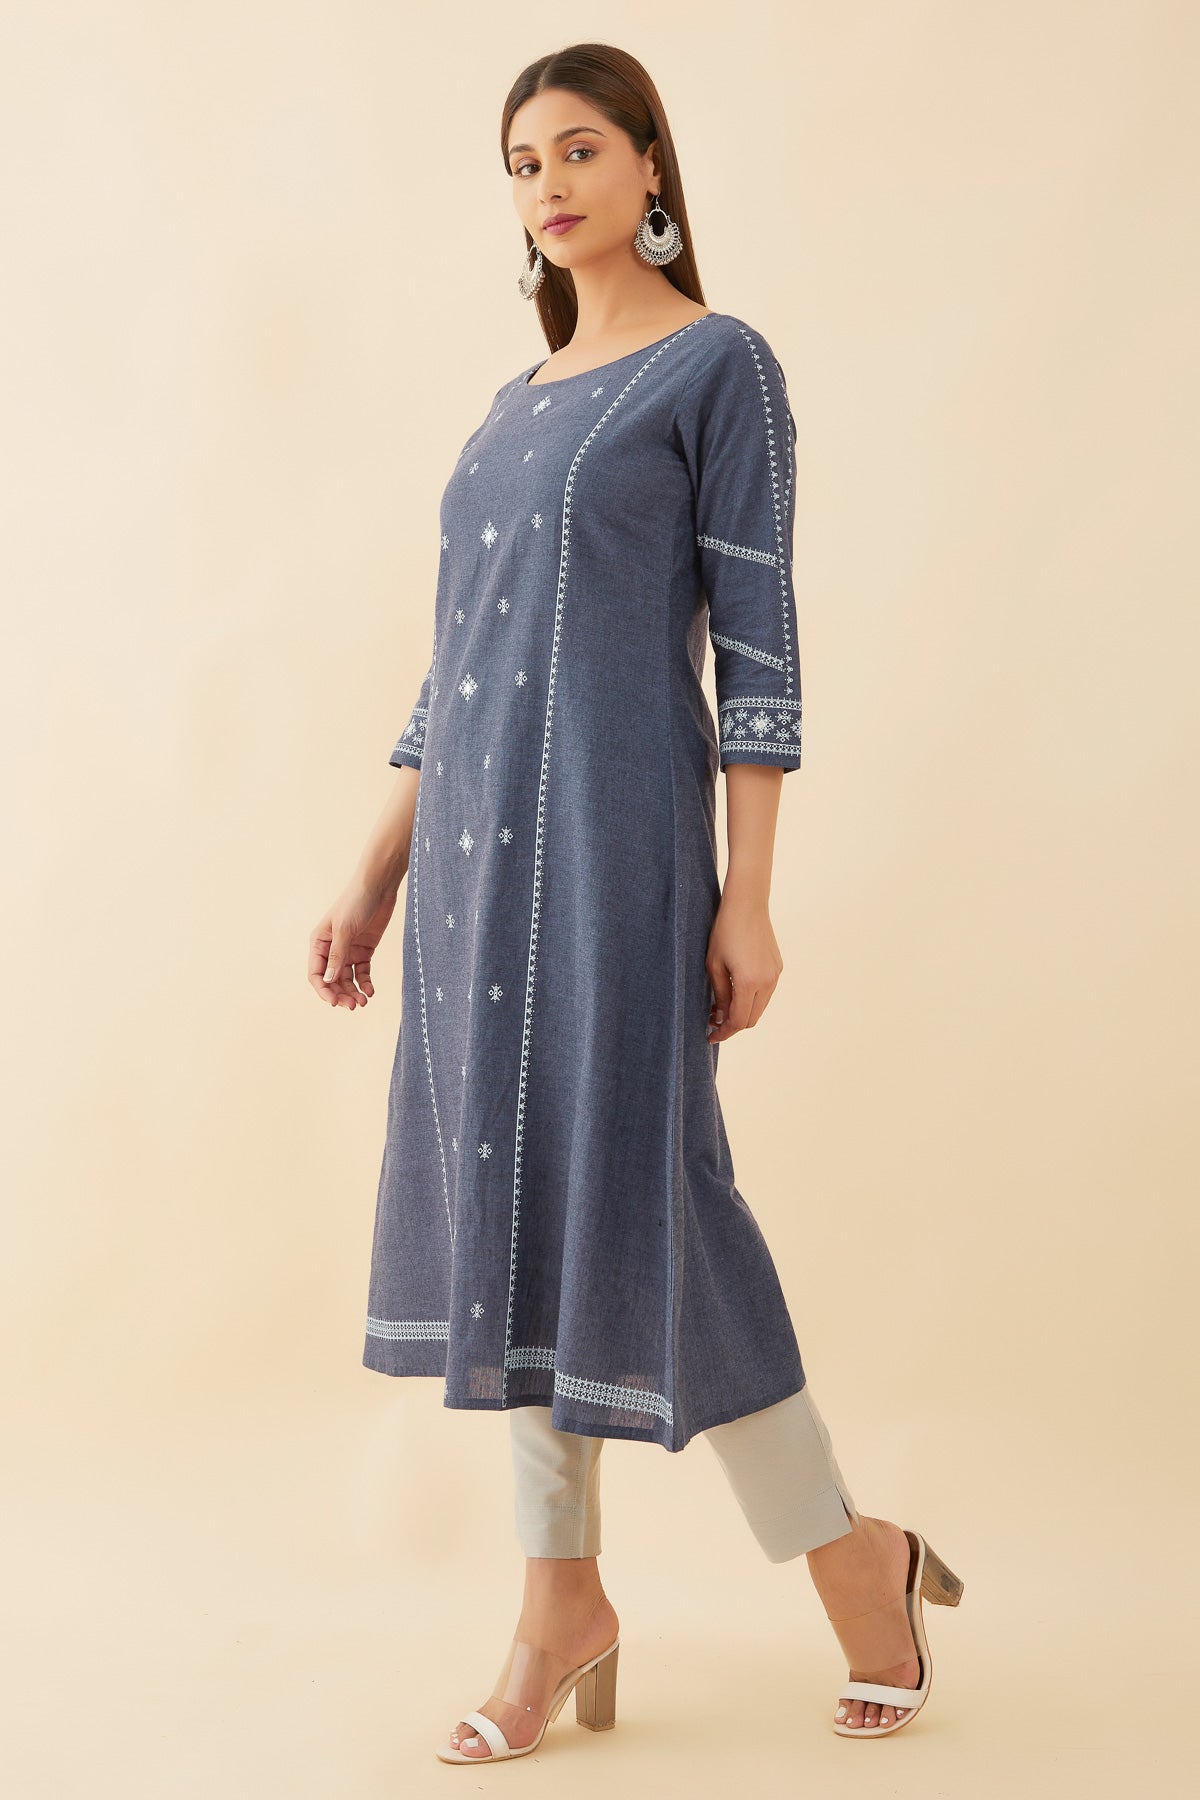 All Over Geometric Printed With Foil Mirror Detail A-Line Kurta - Blue